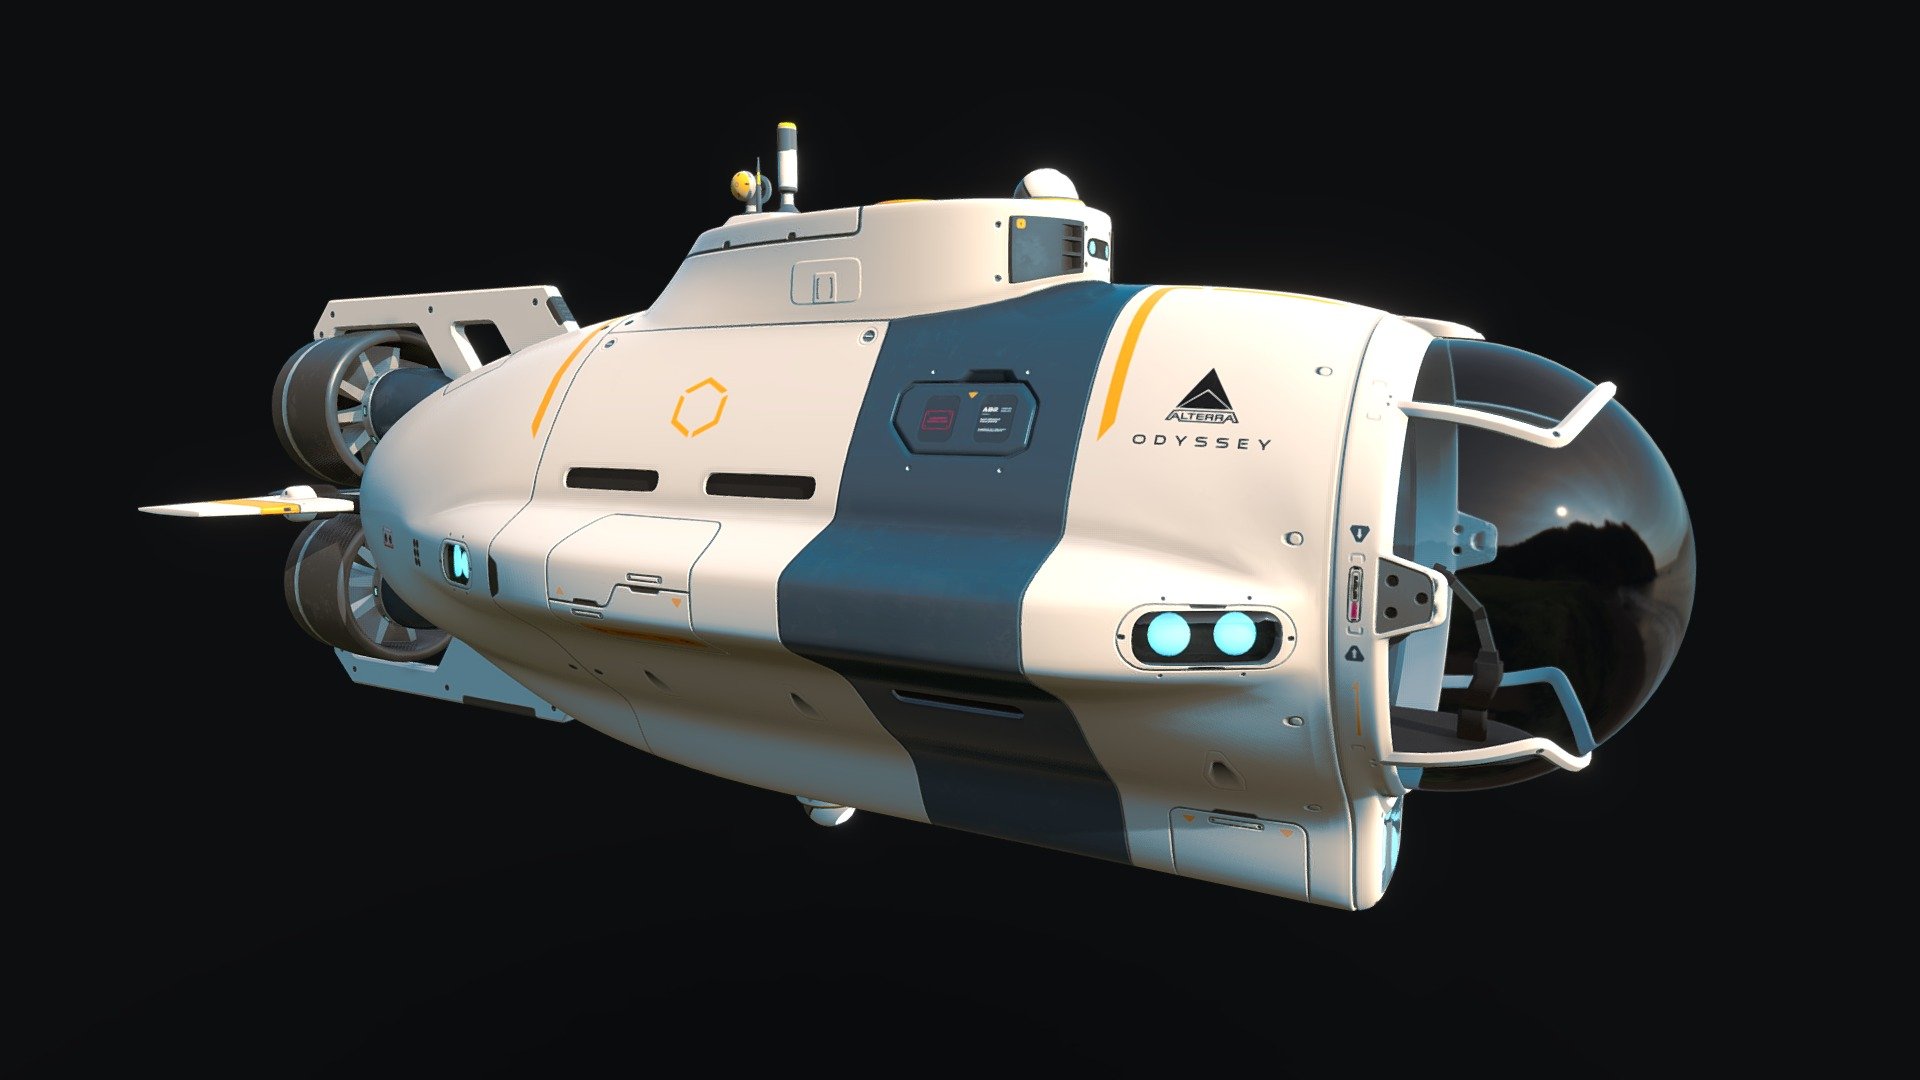 The Odyssey is a Subnautica fan art concept I doodled up a year ago. It's a science and exploration vessel, designed to fit between the Seamoth and Cyclops, with unique scout drone and a mobile scanner system. With the sequel, Subnautica Below Zero soon launching, this was the perfect time to see this concept through to 3D asset form 3d model